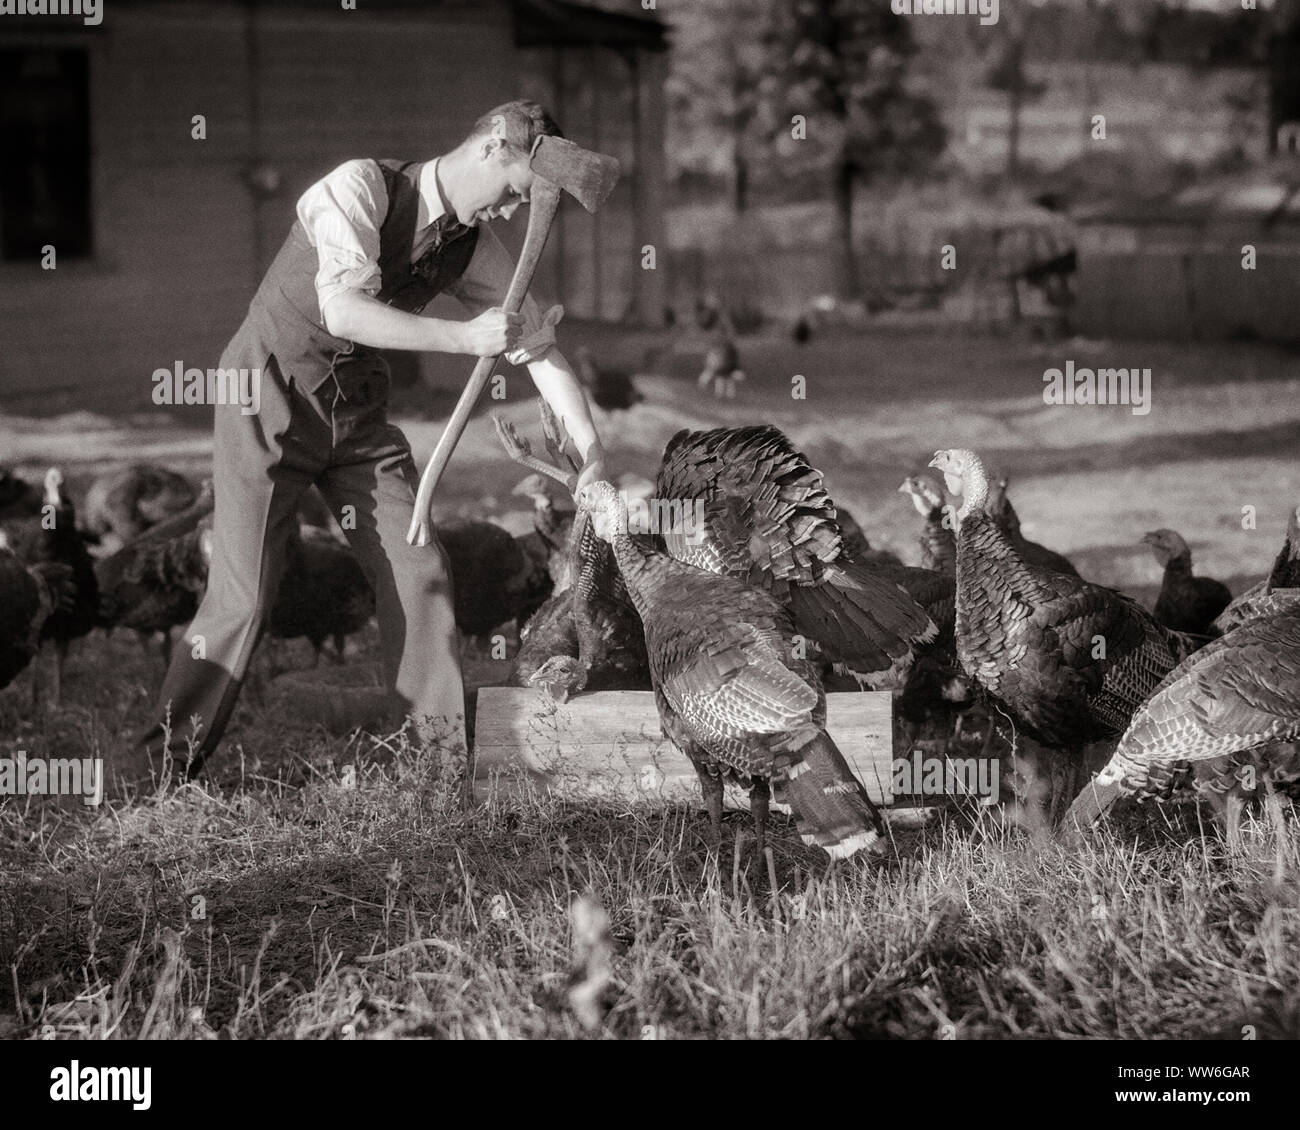 1940s MAN WITH AN AX KILLING TURKEY BEHEADING ON CHOPPING BLOCK  - q43561 CPC001 HARS B&W SADNESS NORTH AMERICA AXE NORTH AMERICAN WING EXCITEMENT FARMERS AUTHORITY THANKFUL THURSDAY NATIONAL HOLIDAY TURKEYS VERTEBRATE WARM-BLOODED GRATEFUL AX CHOPPING FEATHERED MID-ADULT MID-ADULT MAN NOVEMBER POULTRY WINGED BIPEDAL BLACK AND WHITE CAUCASIAN ETHNICITY DOMESTICATED EGG-LAYING GAME BIRD KILLING OLD FASHIONED Stock Photo